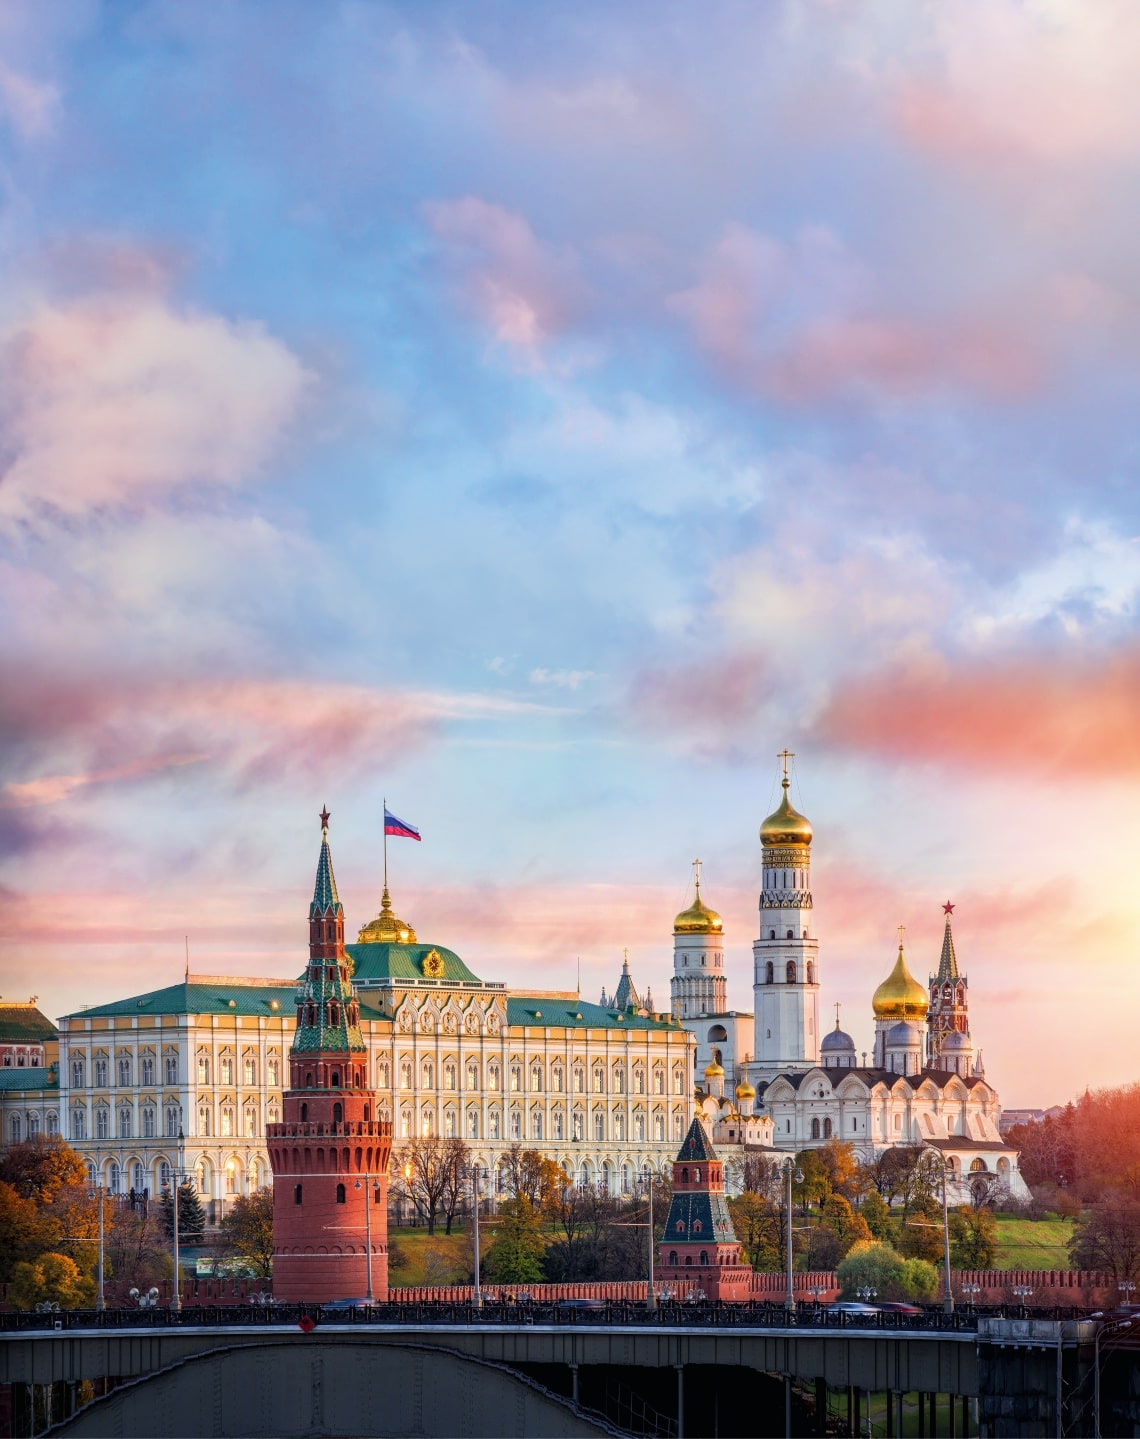 Kremlin welcomes the dawn under the pink clouds